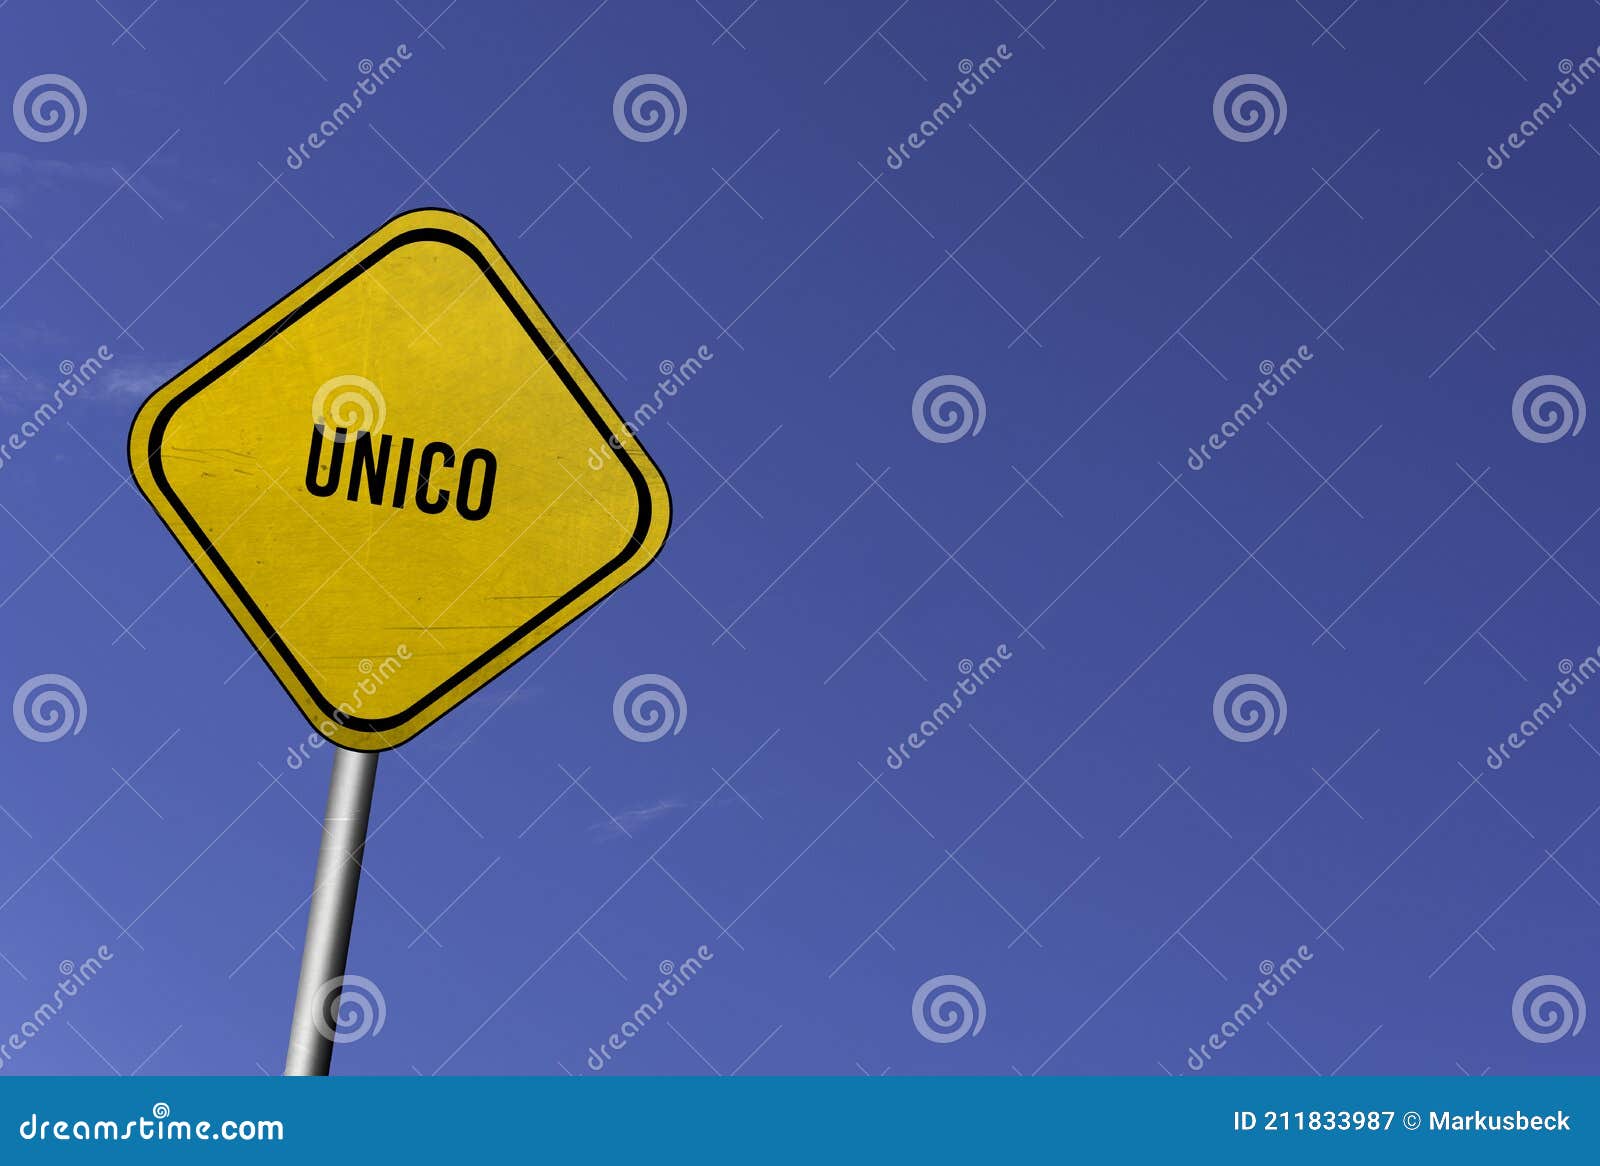 unico - yellow sign with blue sky background